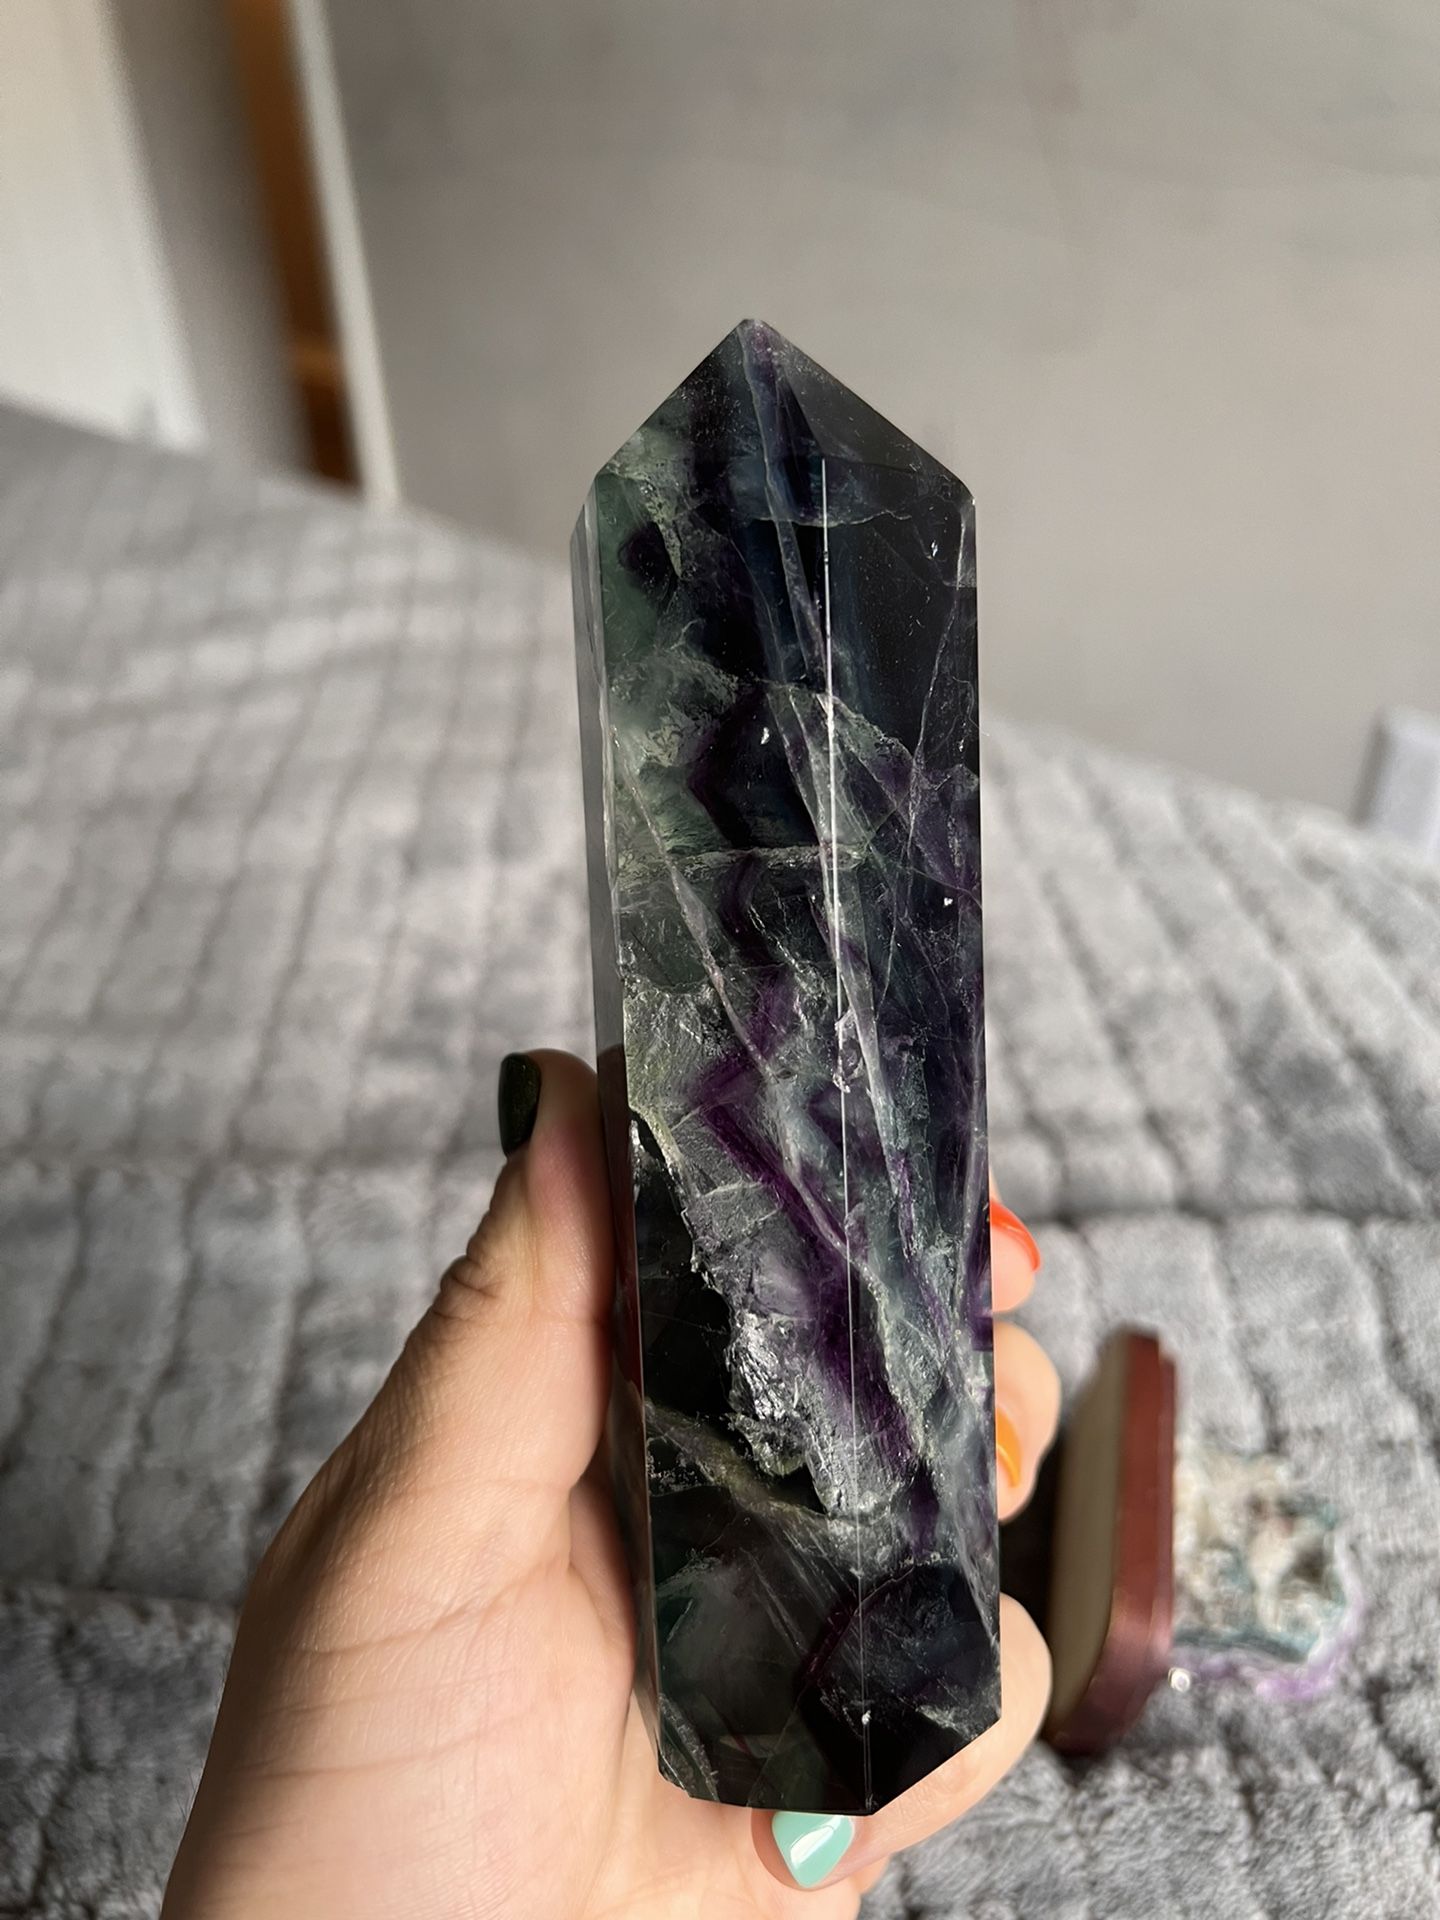 FLUORITE AND AMETHYST CRYSTALS